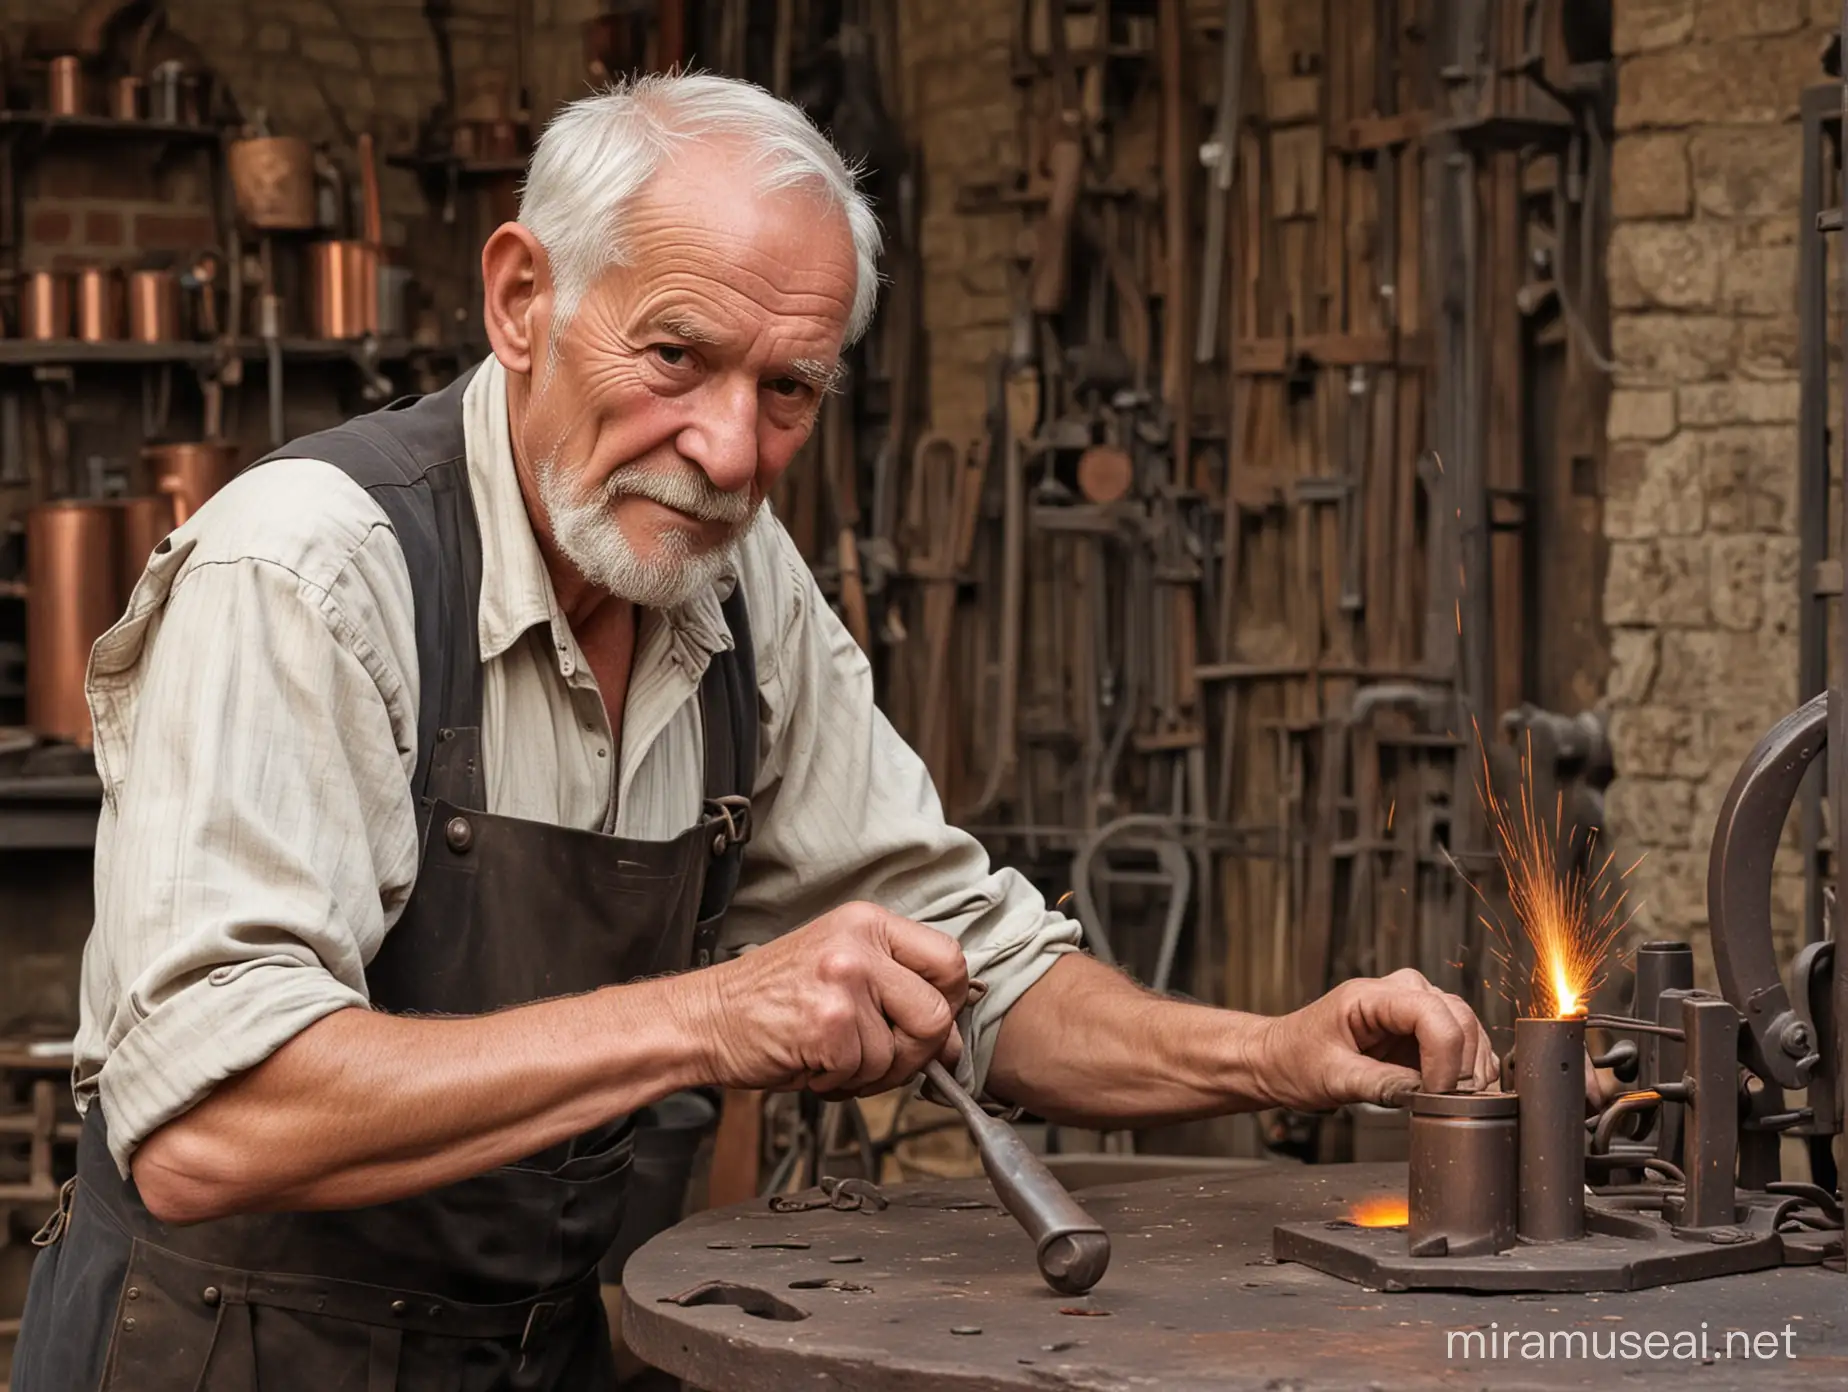 An old man working as a coppersmith. He looks wise and eager. 